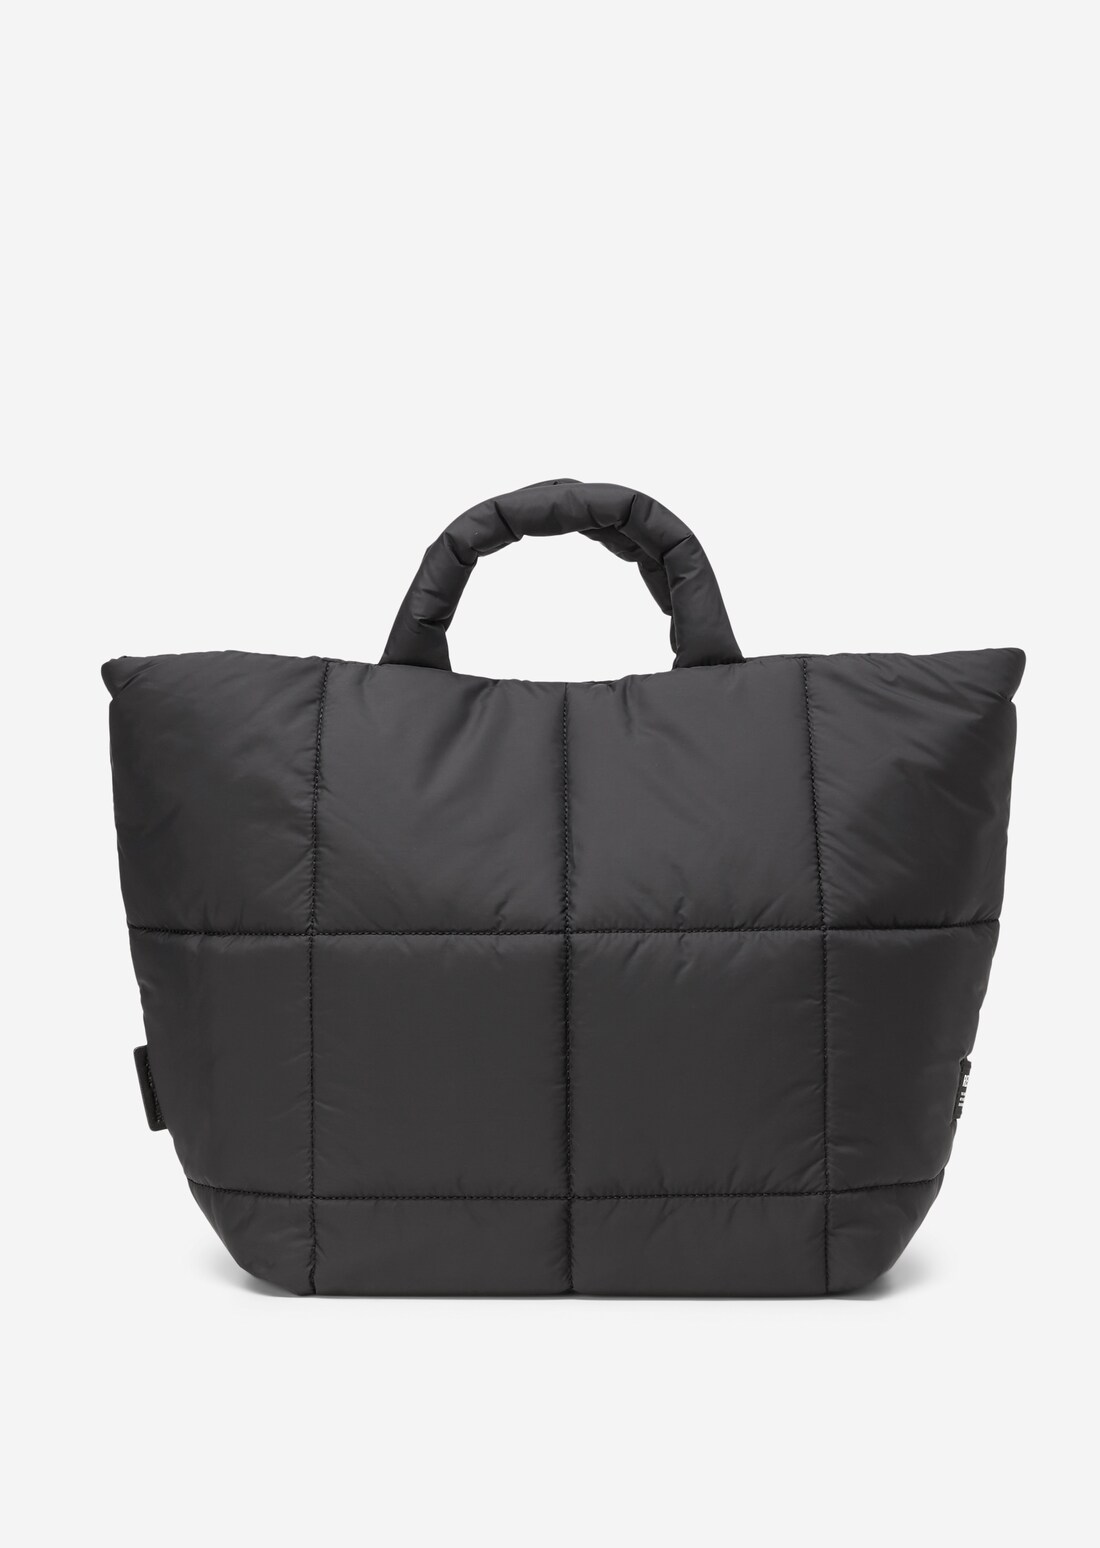 Padded shopper made of recycled material - black | Women | MARC O’POLO